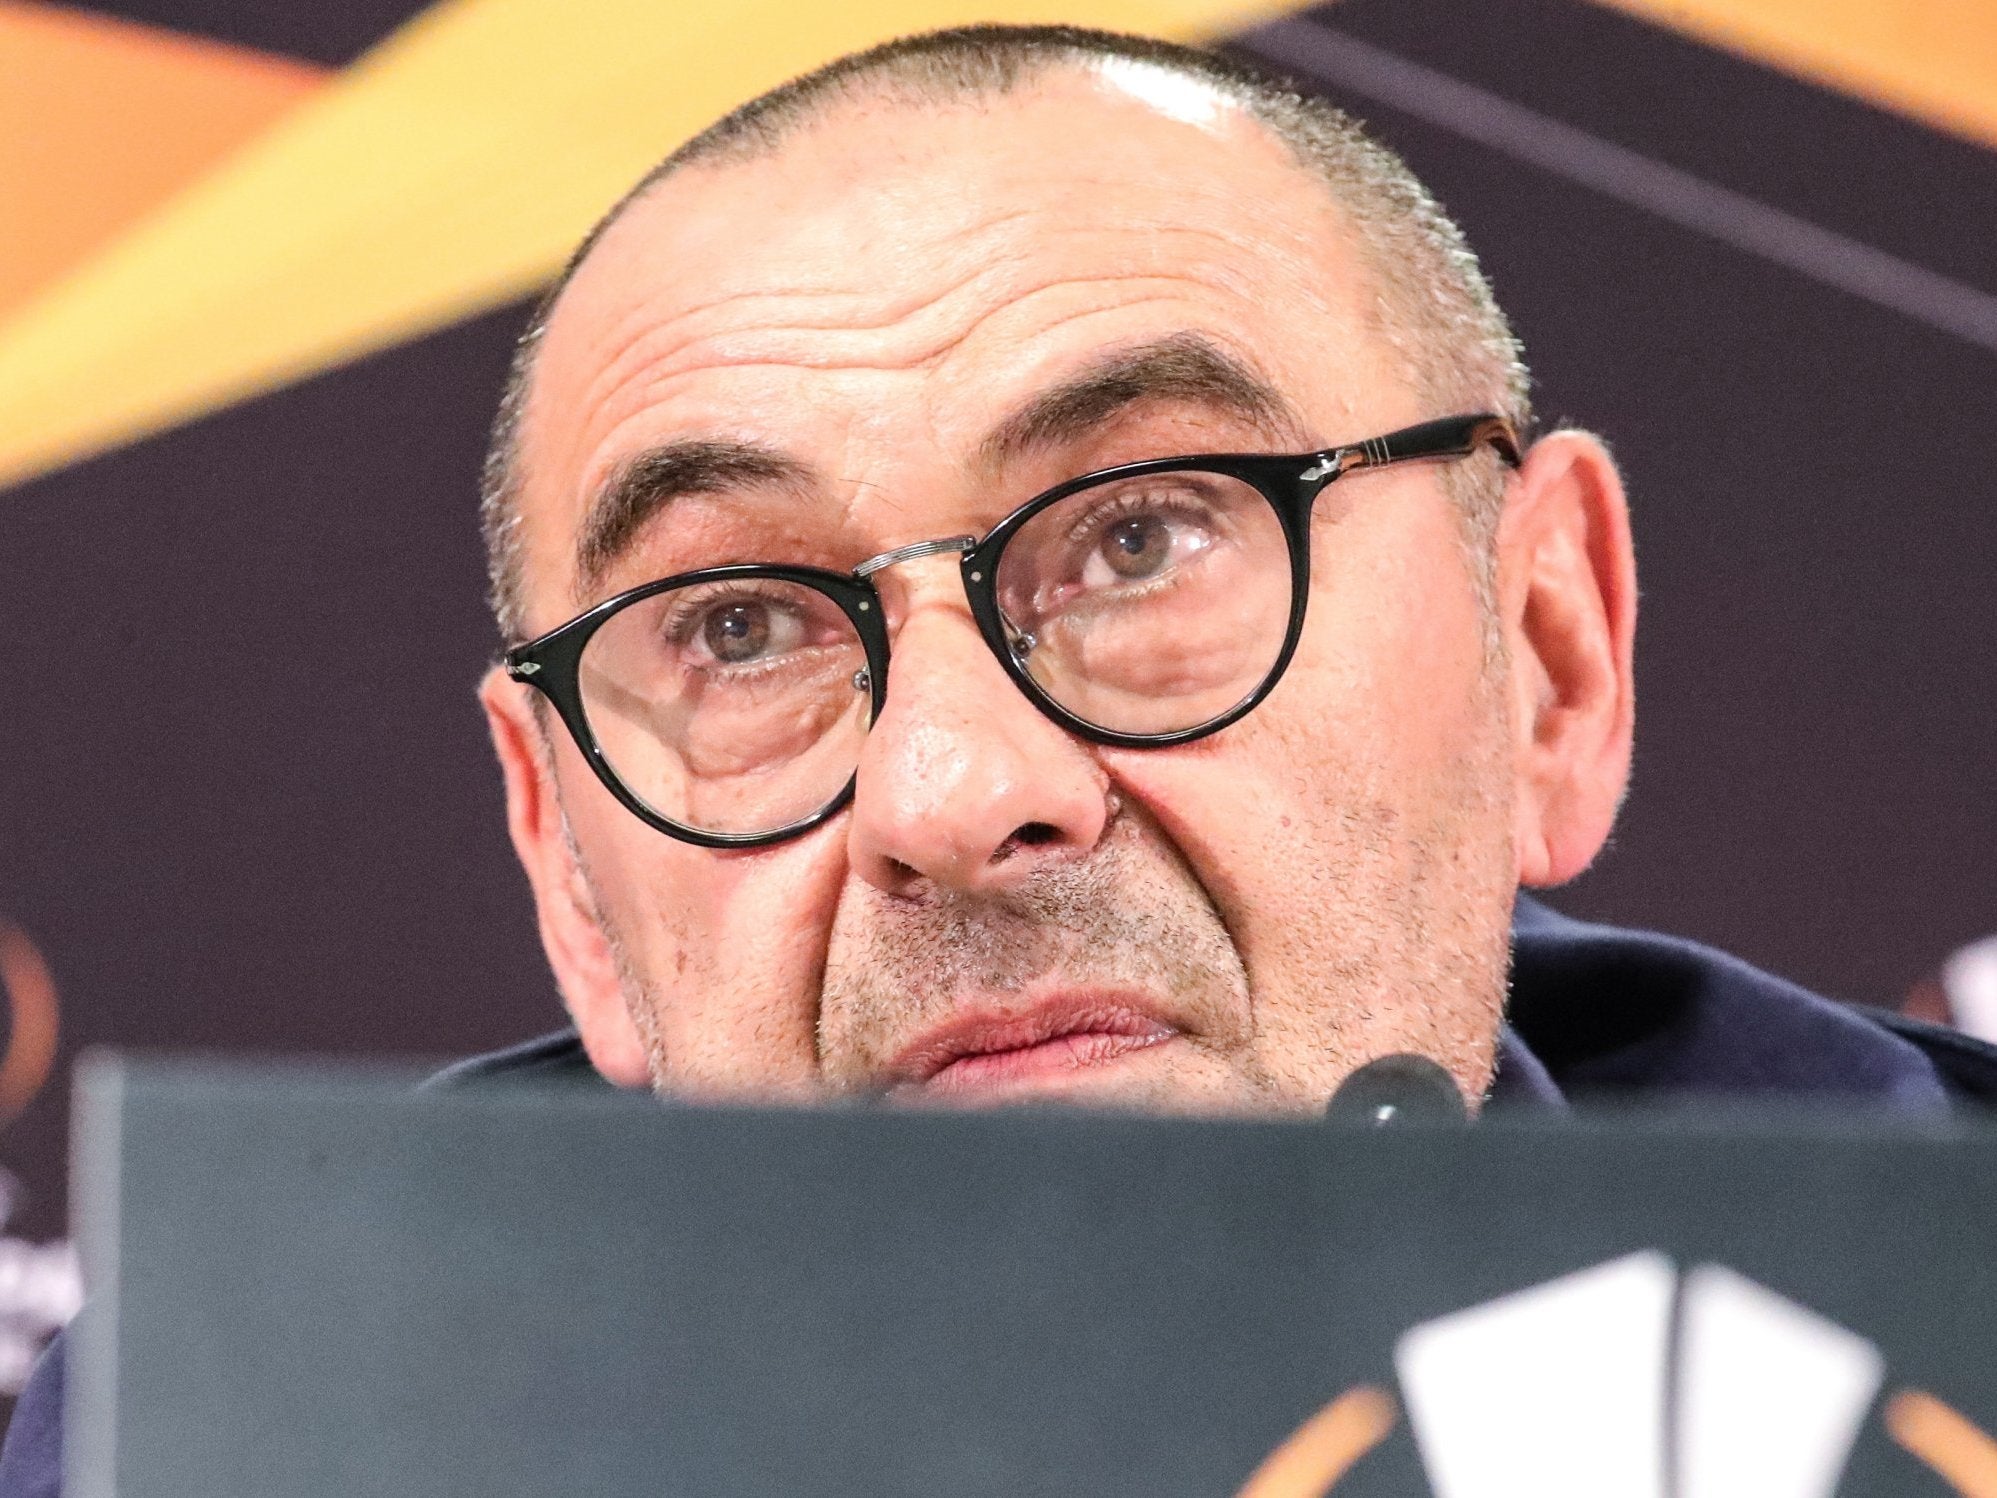 Chelsea’s manager Maurizio Sarri attends a press conference